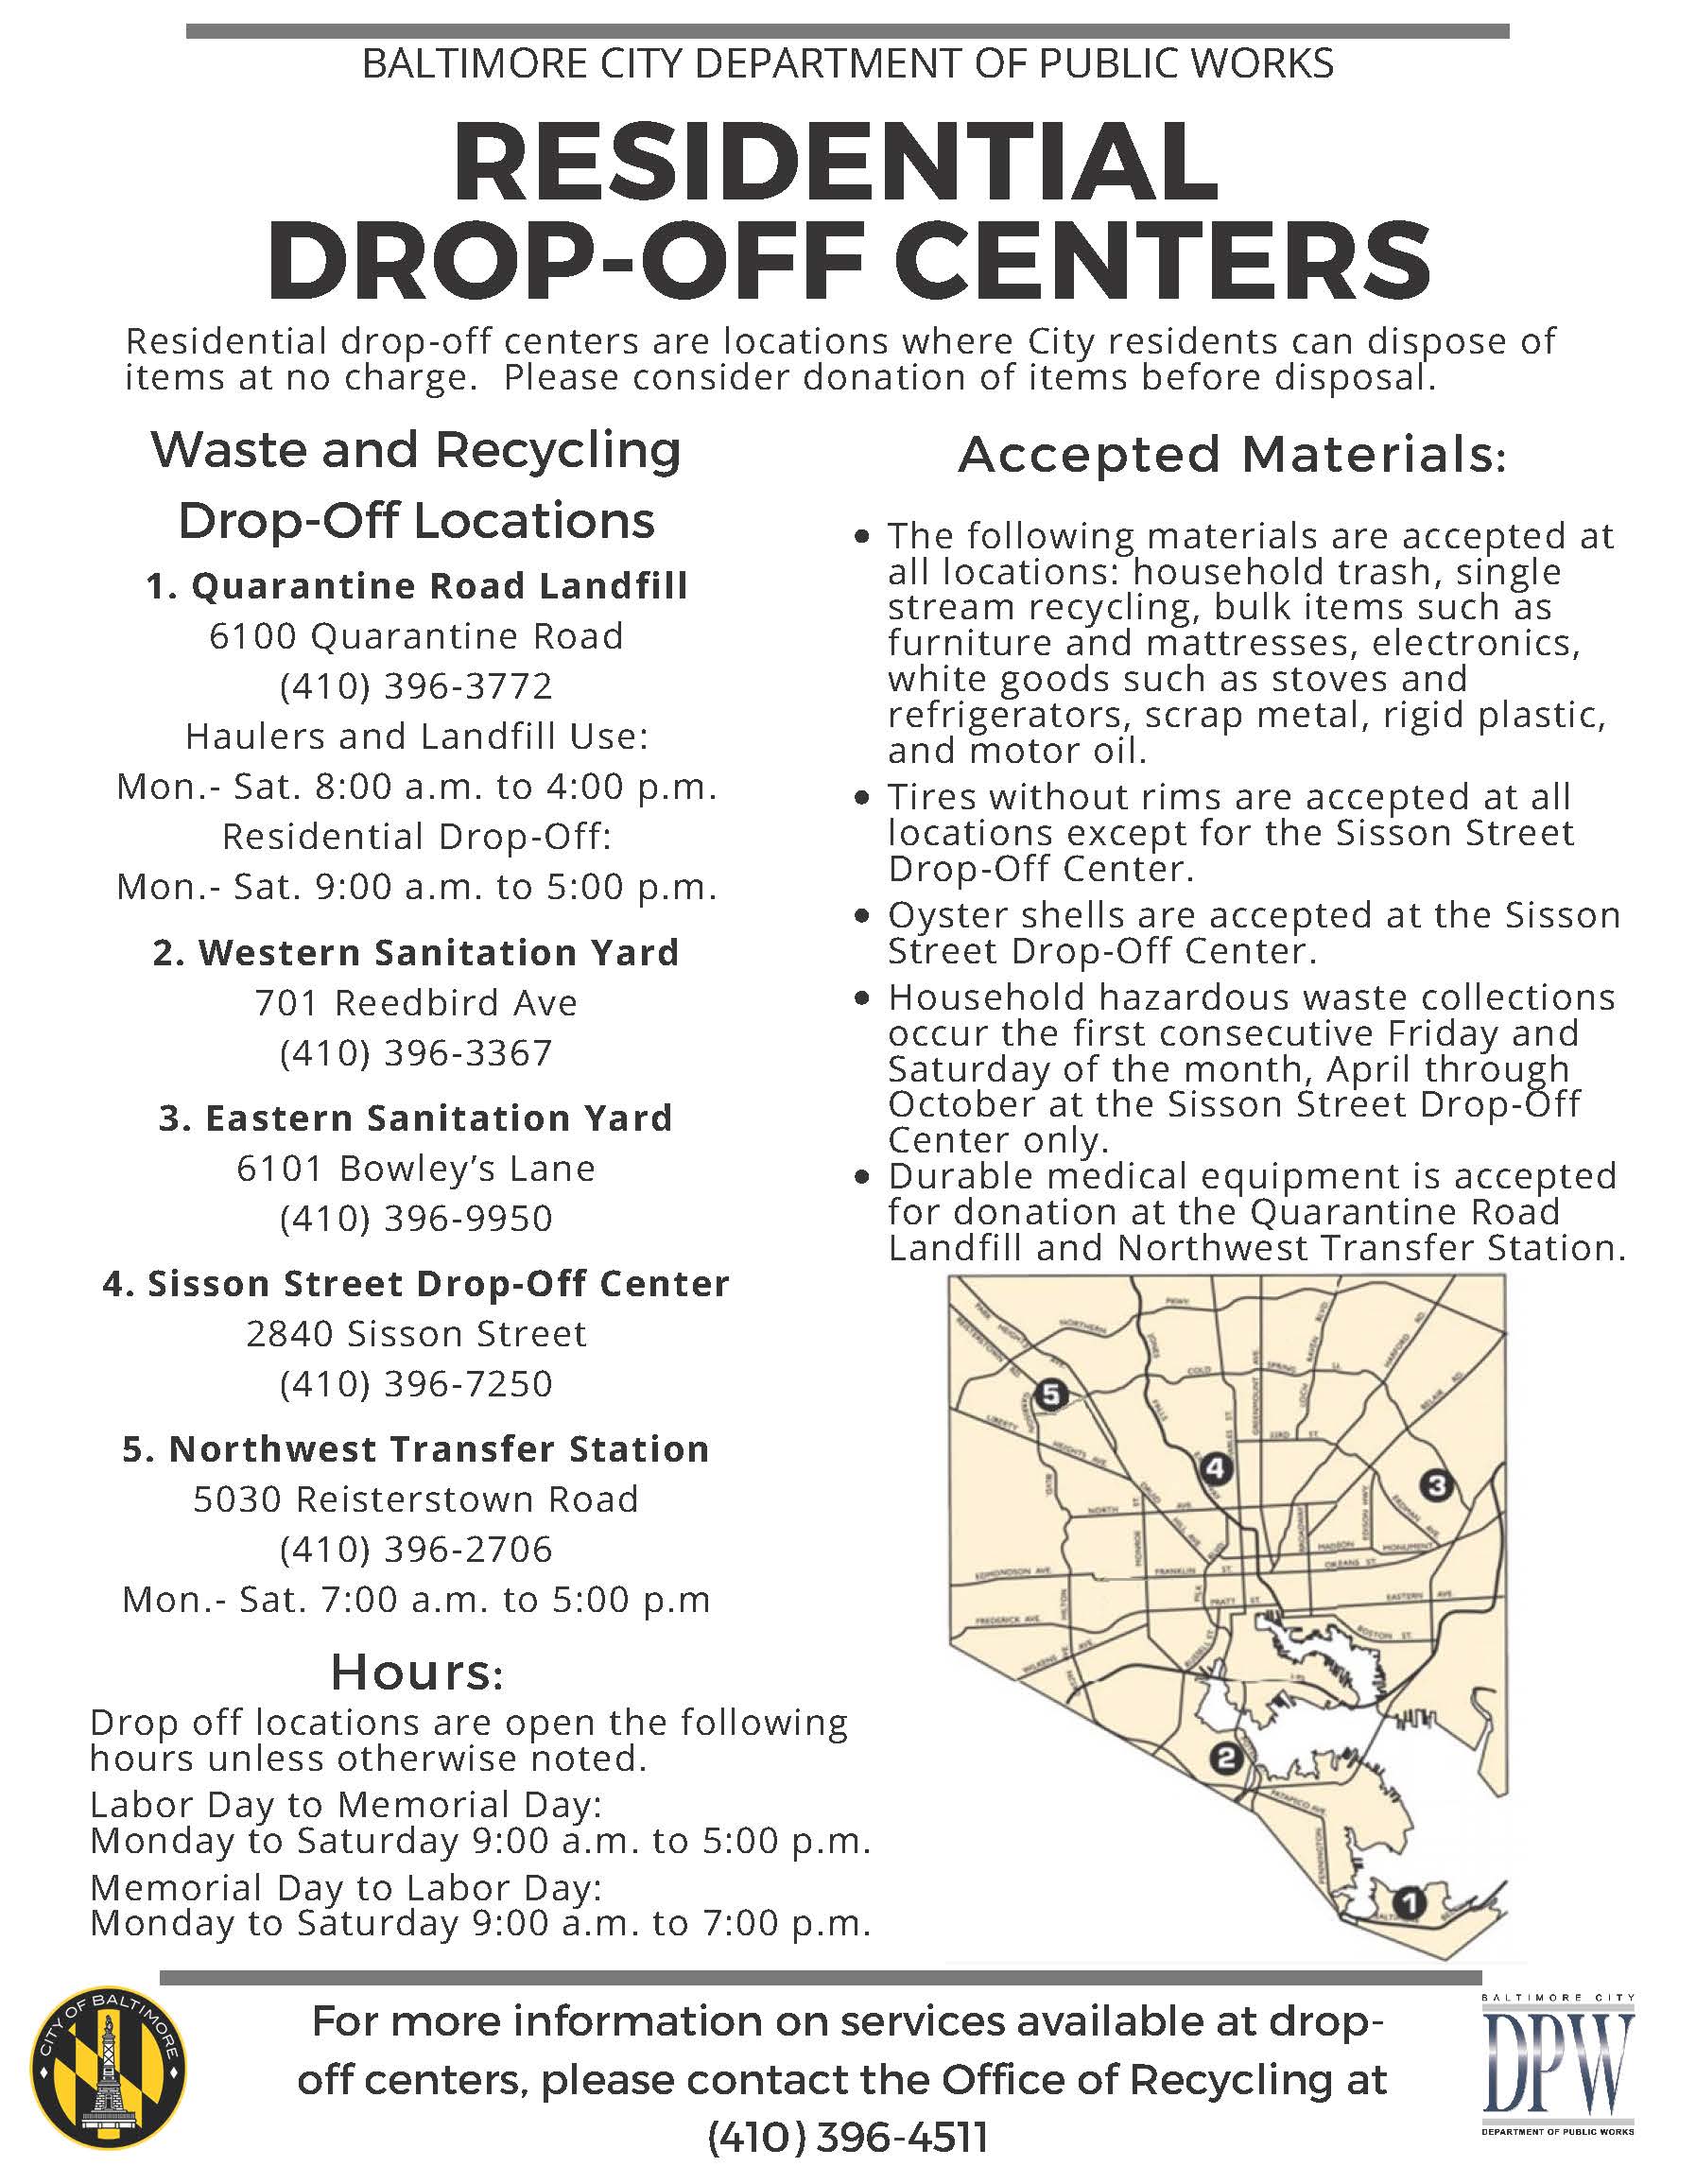 Residential Drop-Off Centers | Baltimore City Department of Public Works